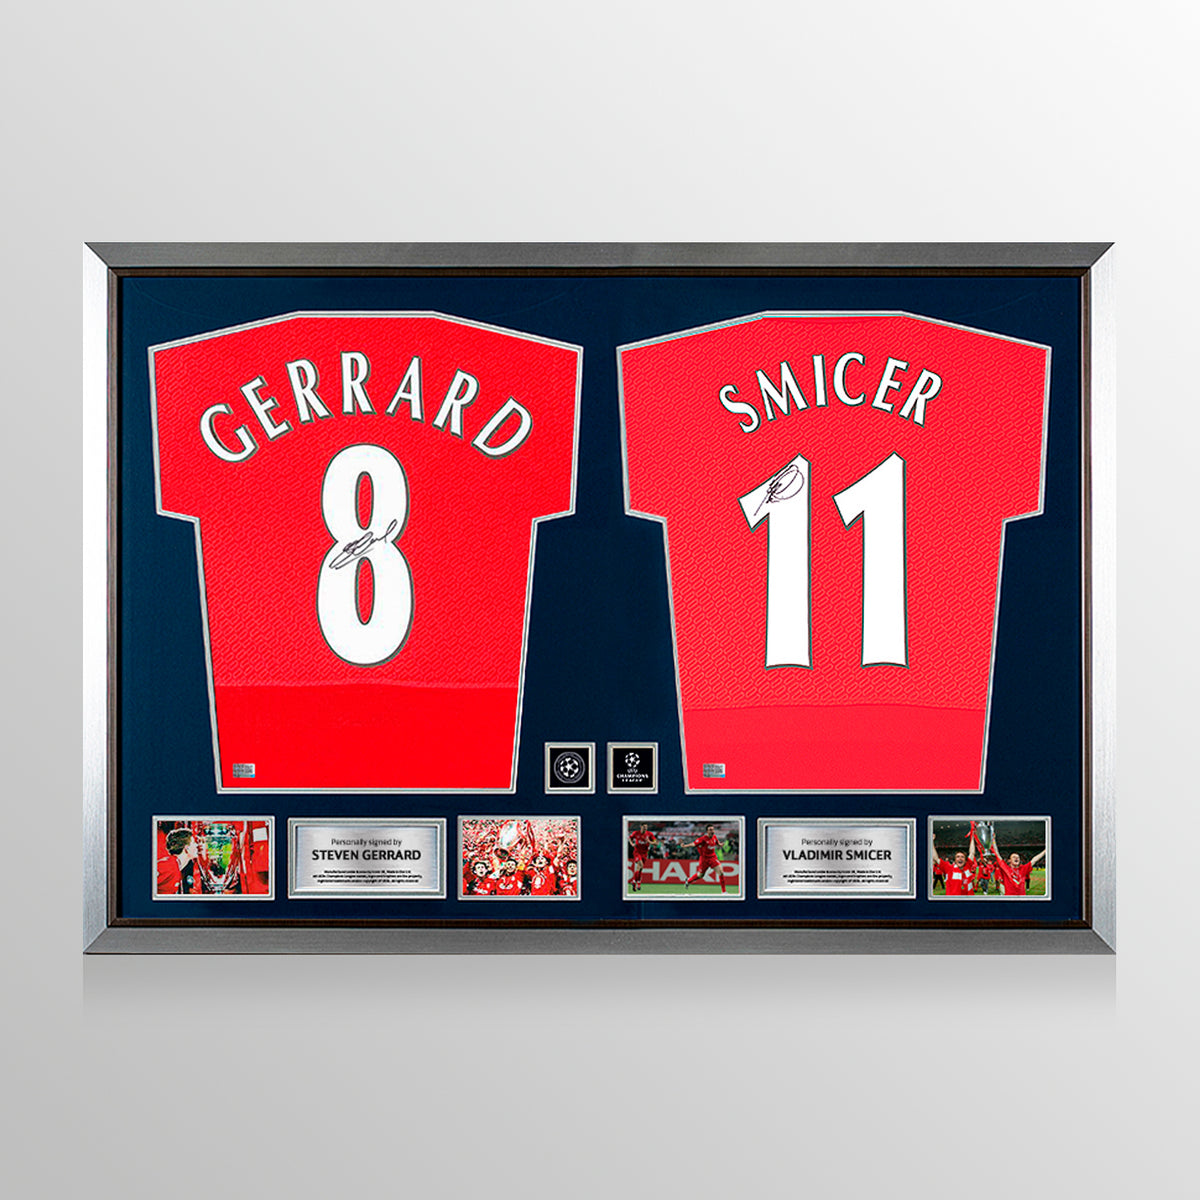 Steven Gerrard &amp; Vladimir Smicer Signed Liverpool FC Shirts In Official UEFA Champions League Dual Frame